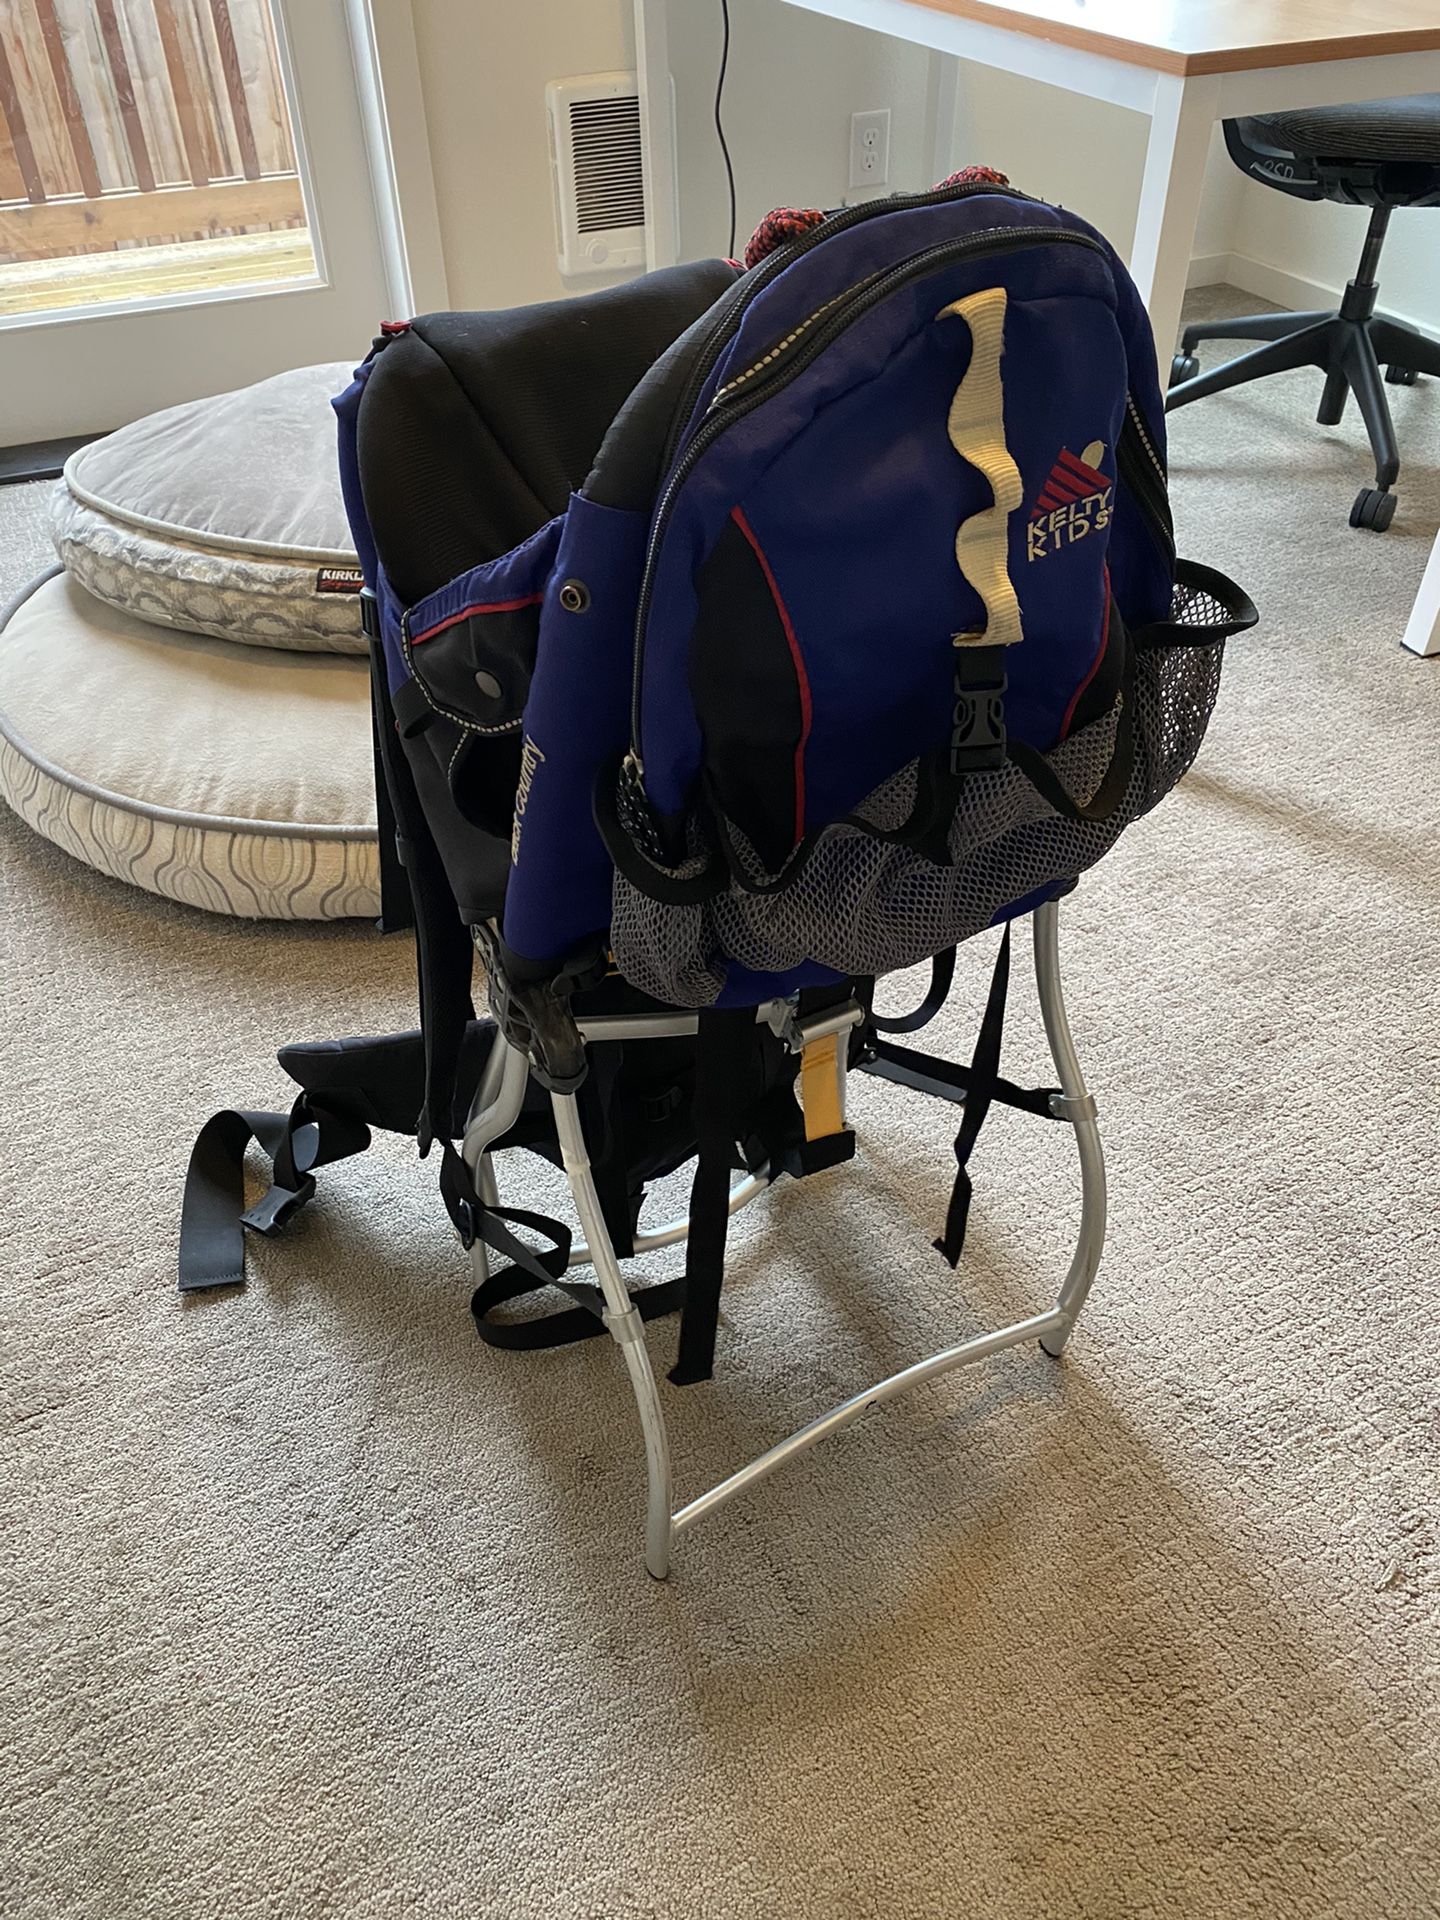 Hiking backpack child carrier